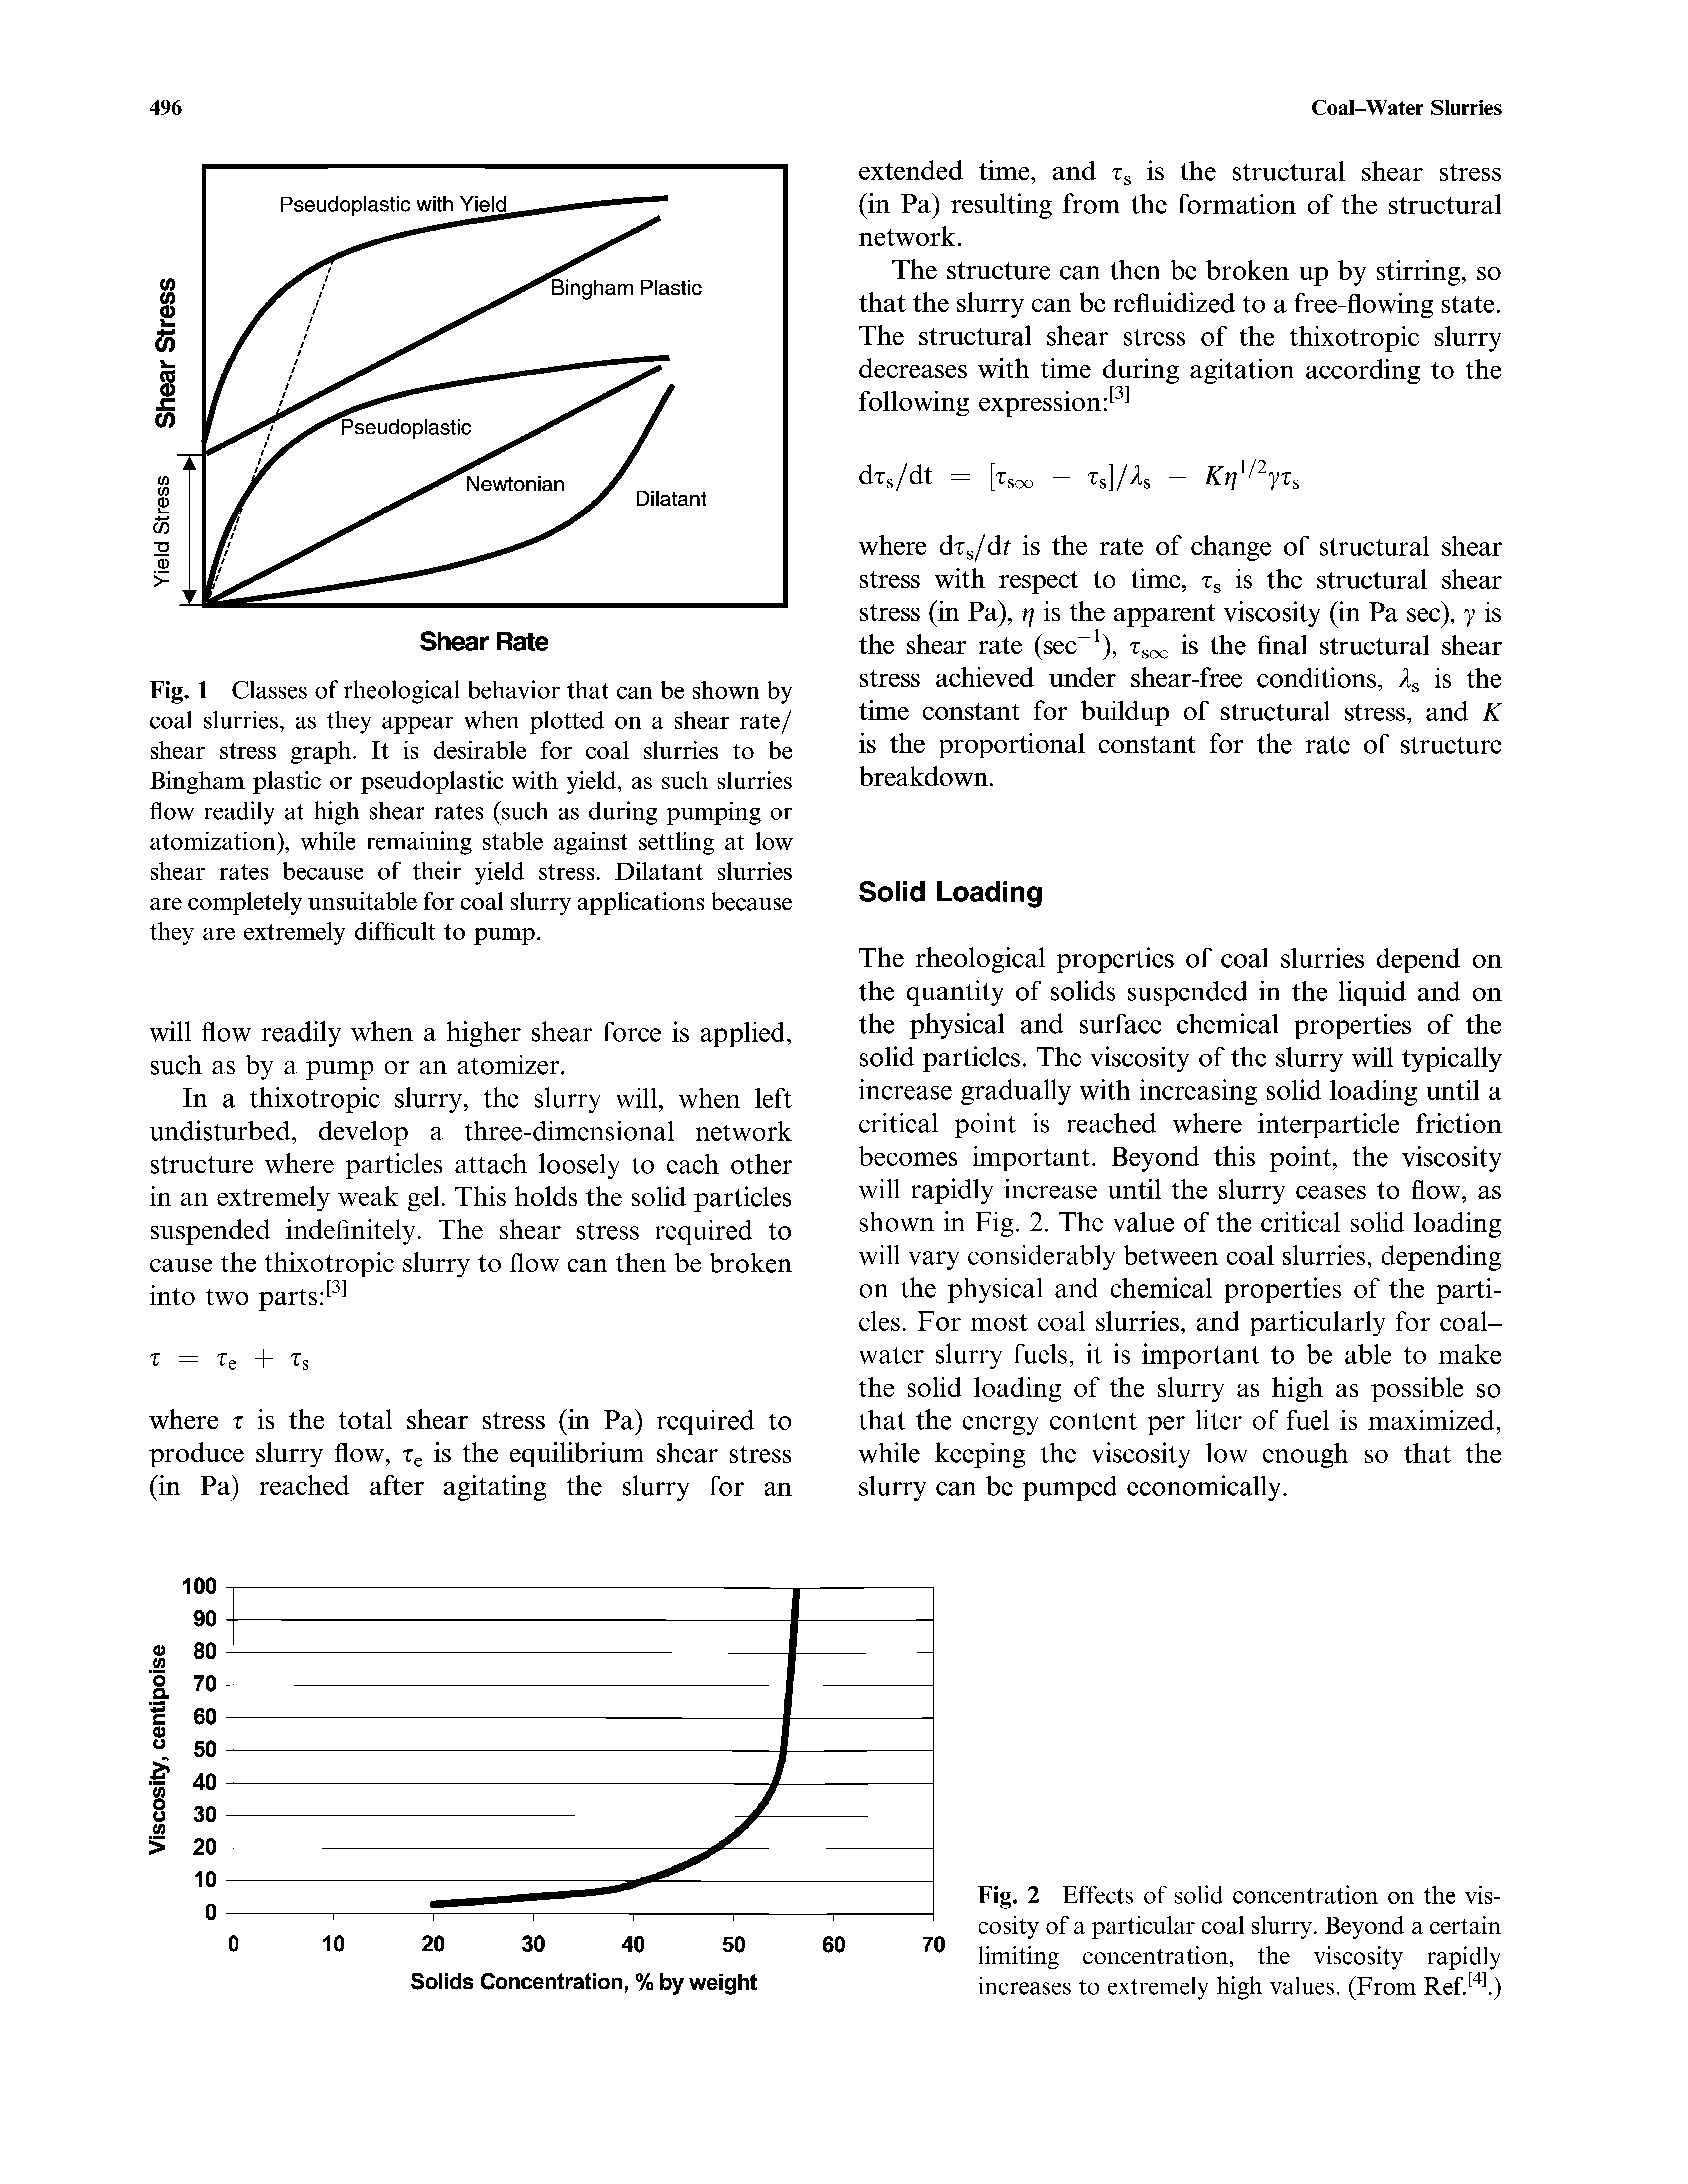 Fig. 1 Classes of rheological behavior that can be shown by coal slurries, as they appear when plotted on a shear rate/ shear stress graph. It is desirable for coal slurries to be Bingham plastic or pseudoplastic with yield, as such slurries flow readily at high shear rates (such as during pumping or atomization), while remaining stable against settling at low shear rates because of their yield stress. Dilatant slurries are completely unsuitable for coal slurry applications because they are extremely difficult to pump.